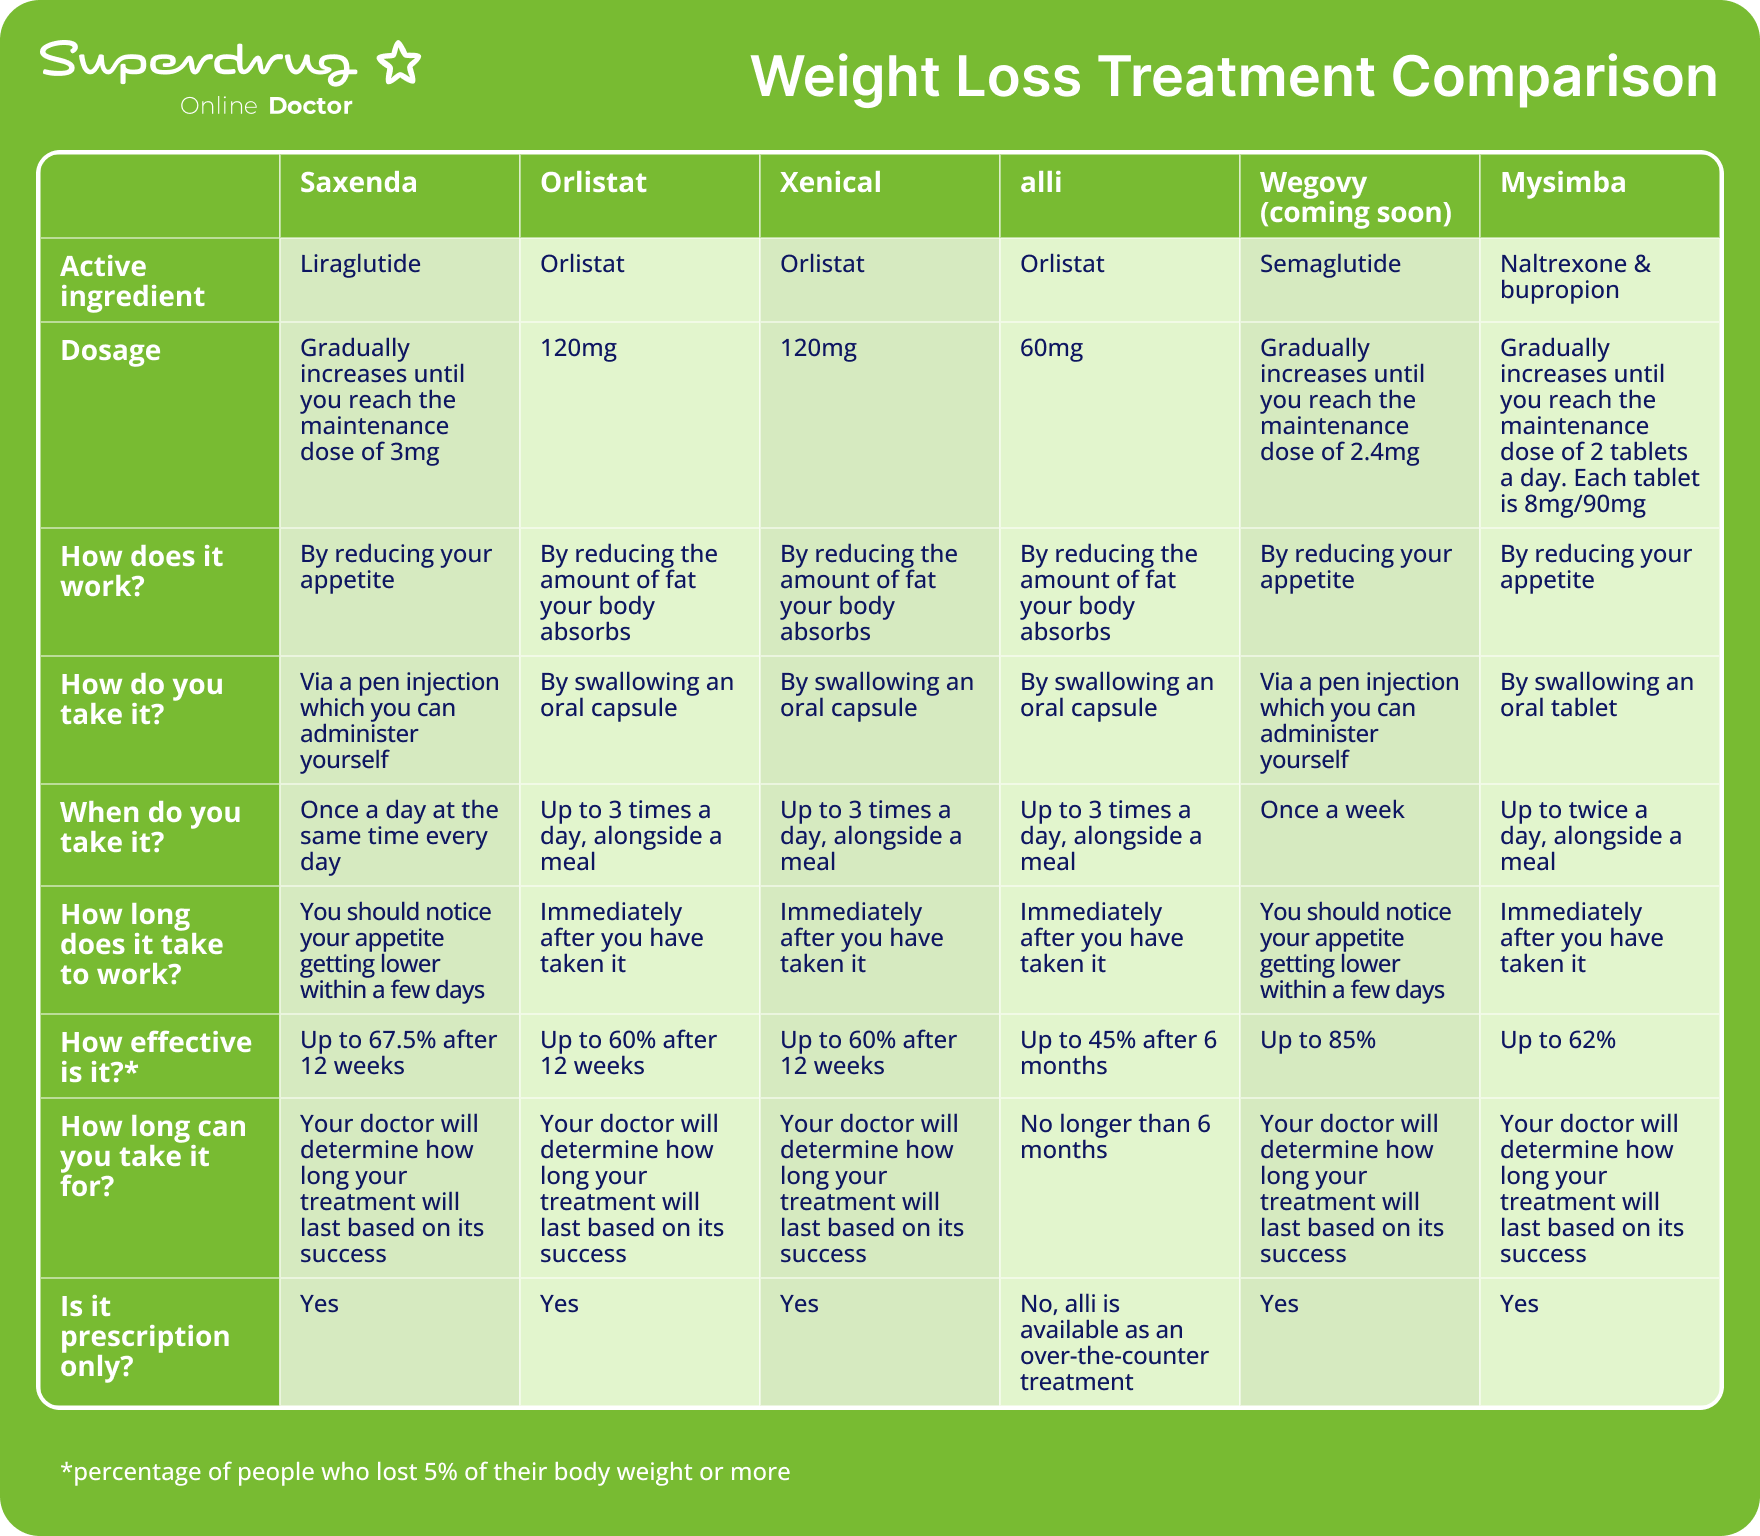 A table comparing various weight loss medications